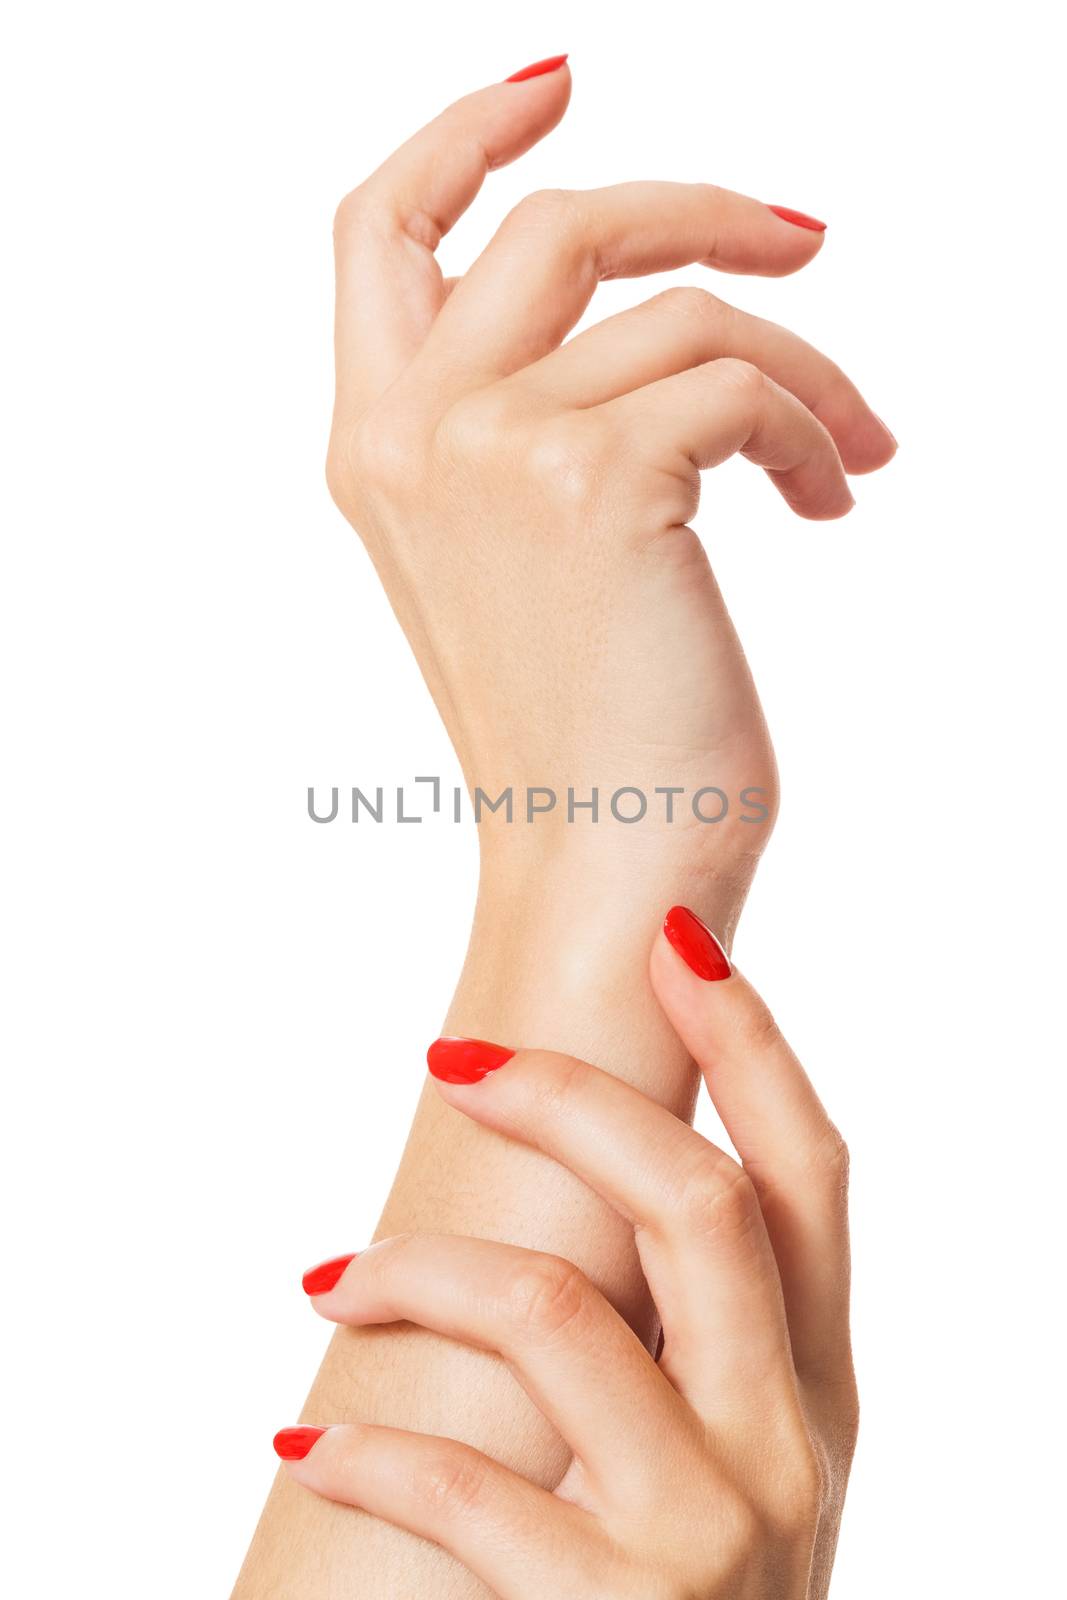 Woman with beautiful manicured red fingernails by juniart